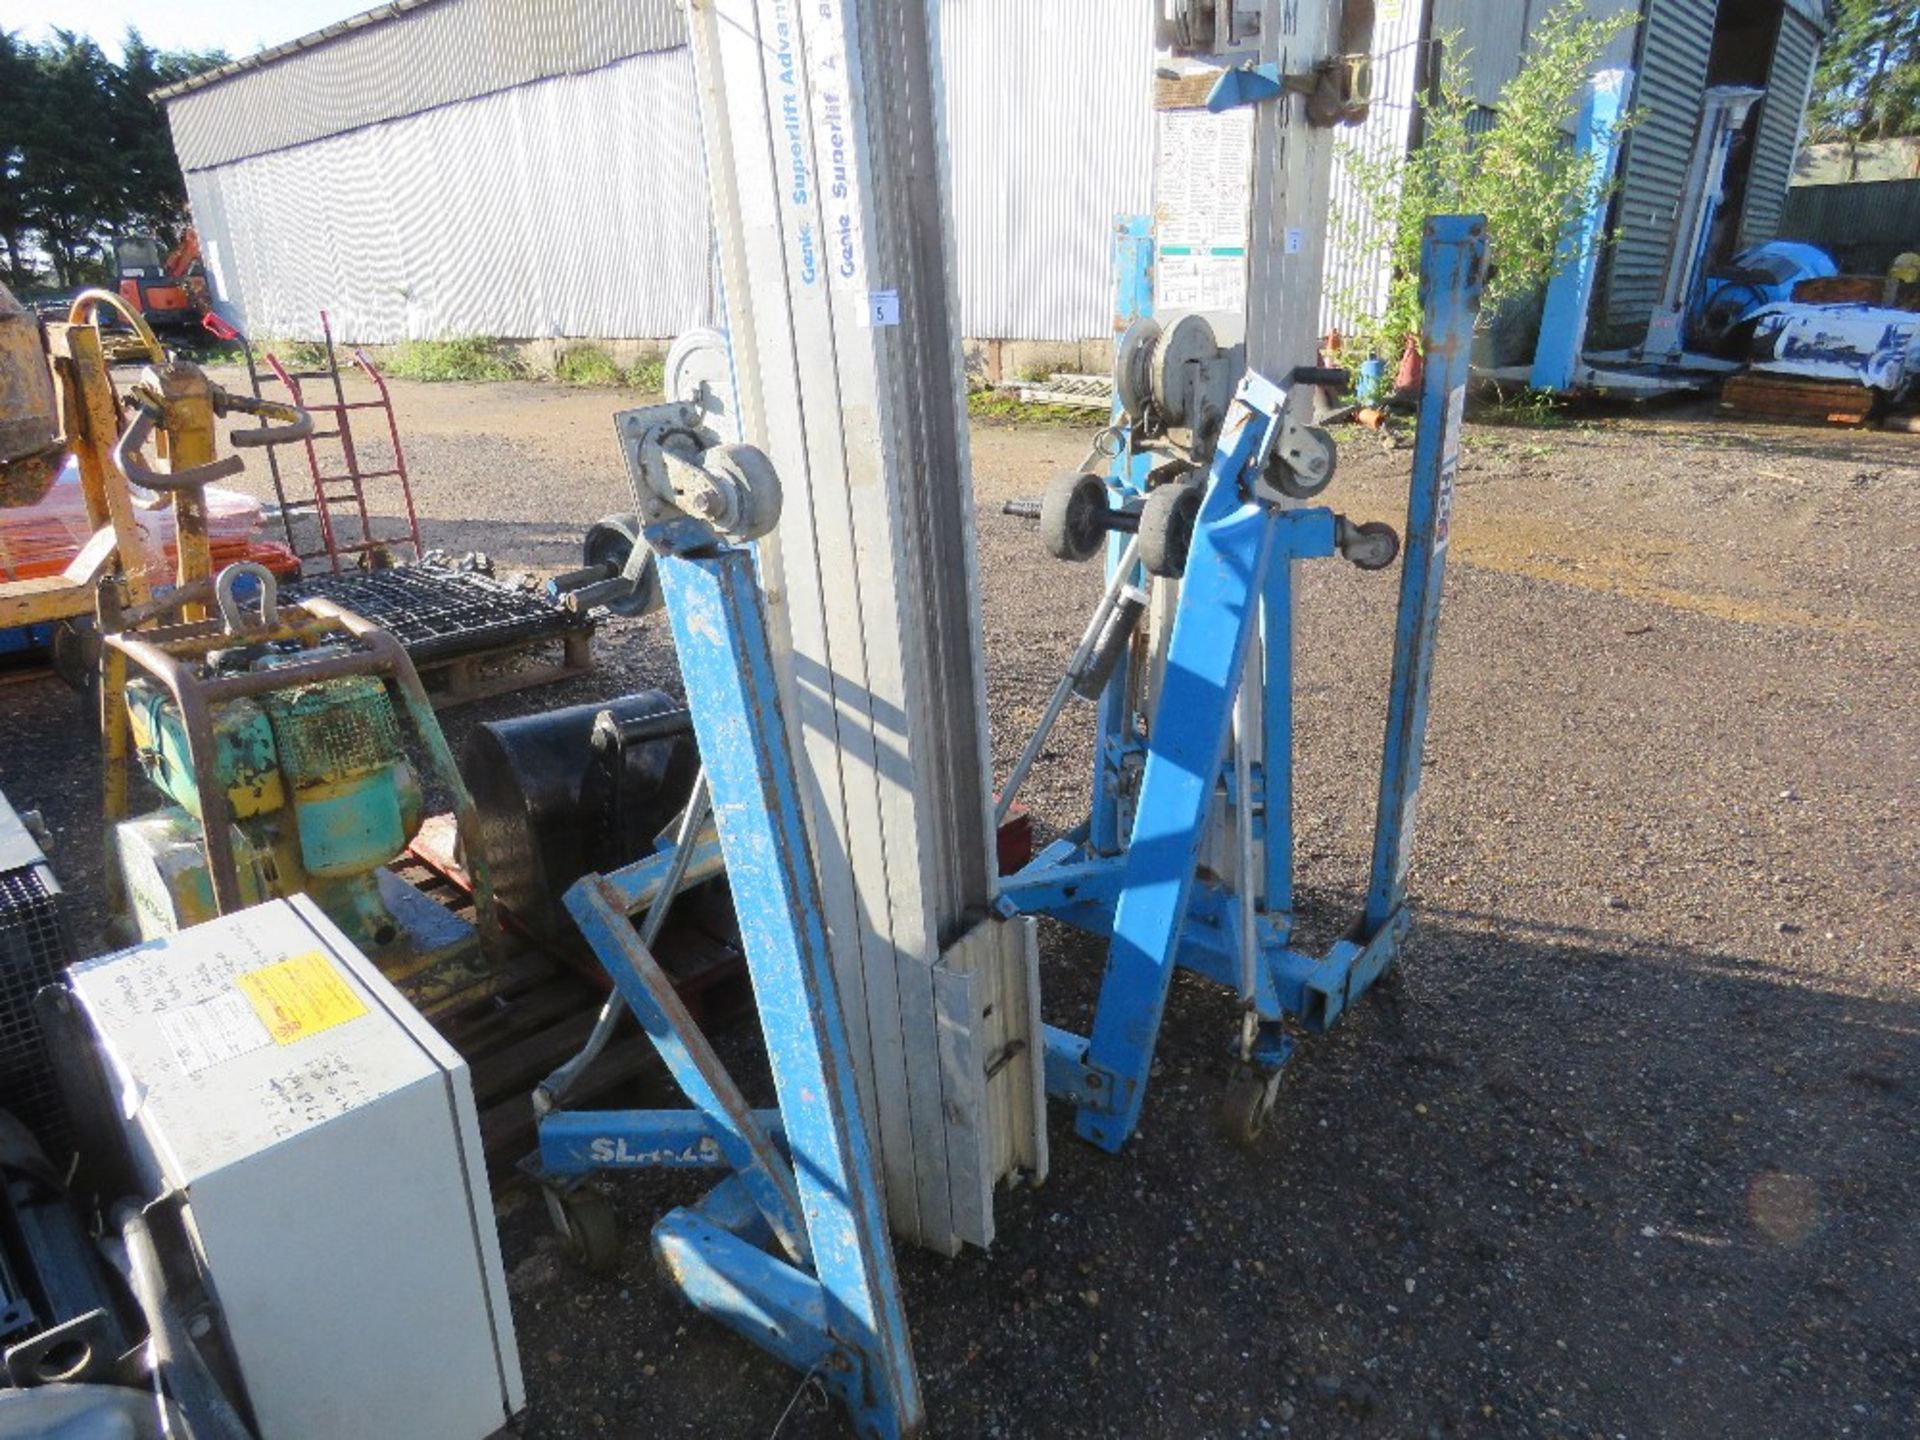 GENIE 3 STAGE MATERIAL LIFT UNIT WITH FORKS.